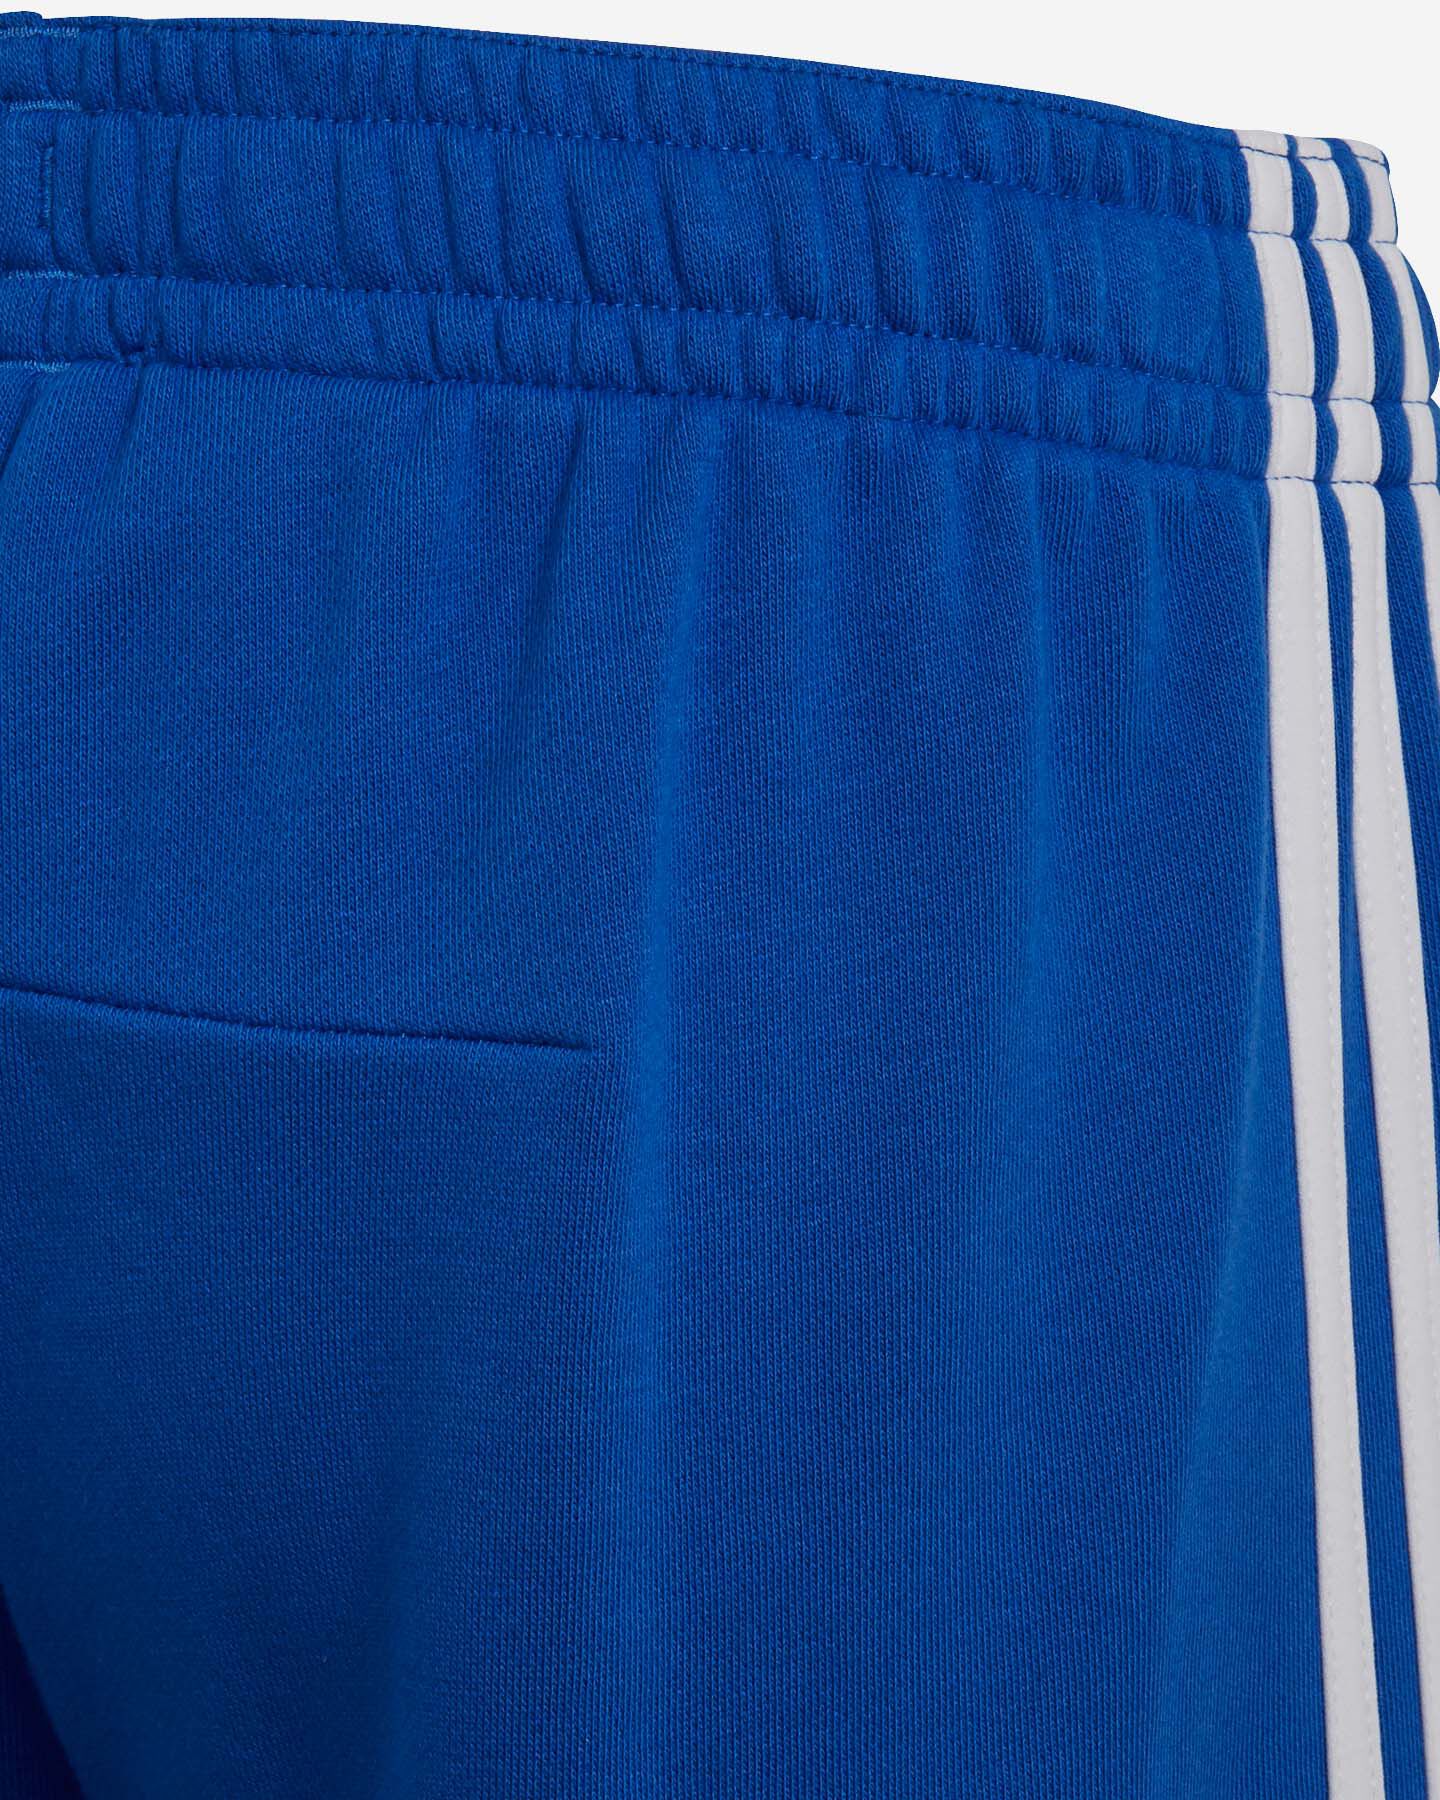  Pantaloncini ADIDAS MUST HAVES BADGE OF SPORT JR S5149199|UNI|7-8A scatto 2